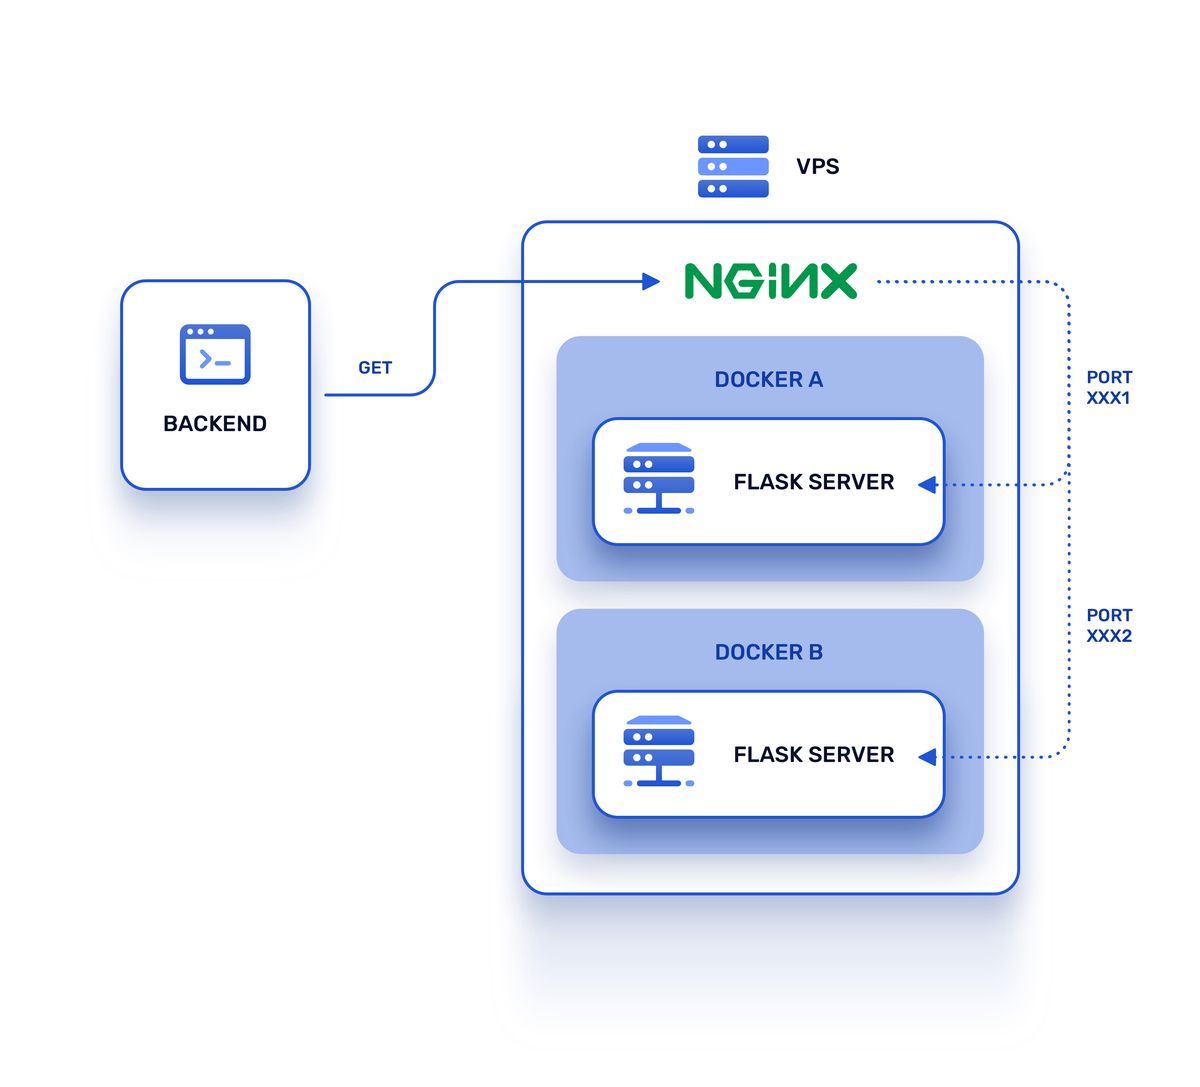 Second version of the architecture with Nginx as reverse proxy